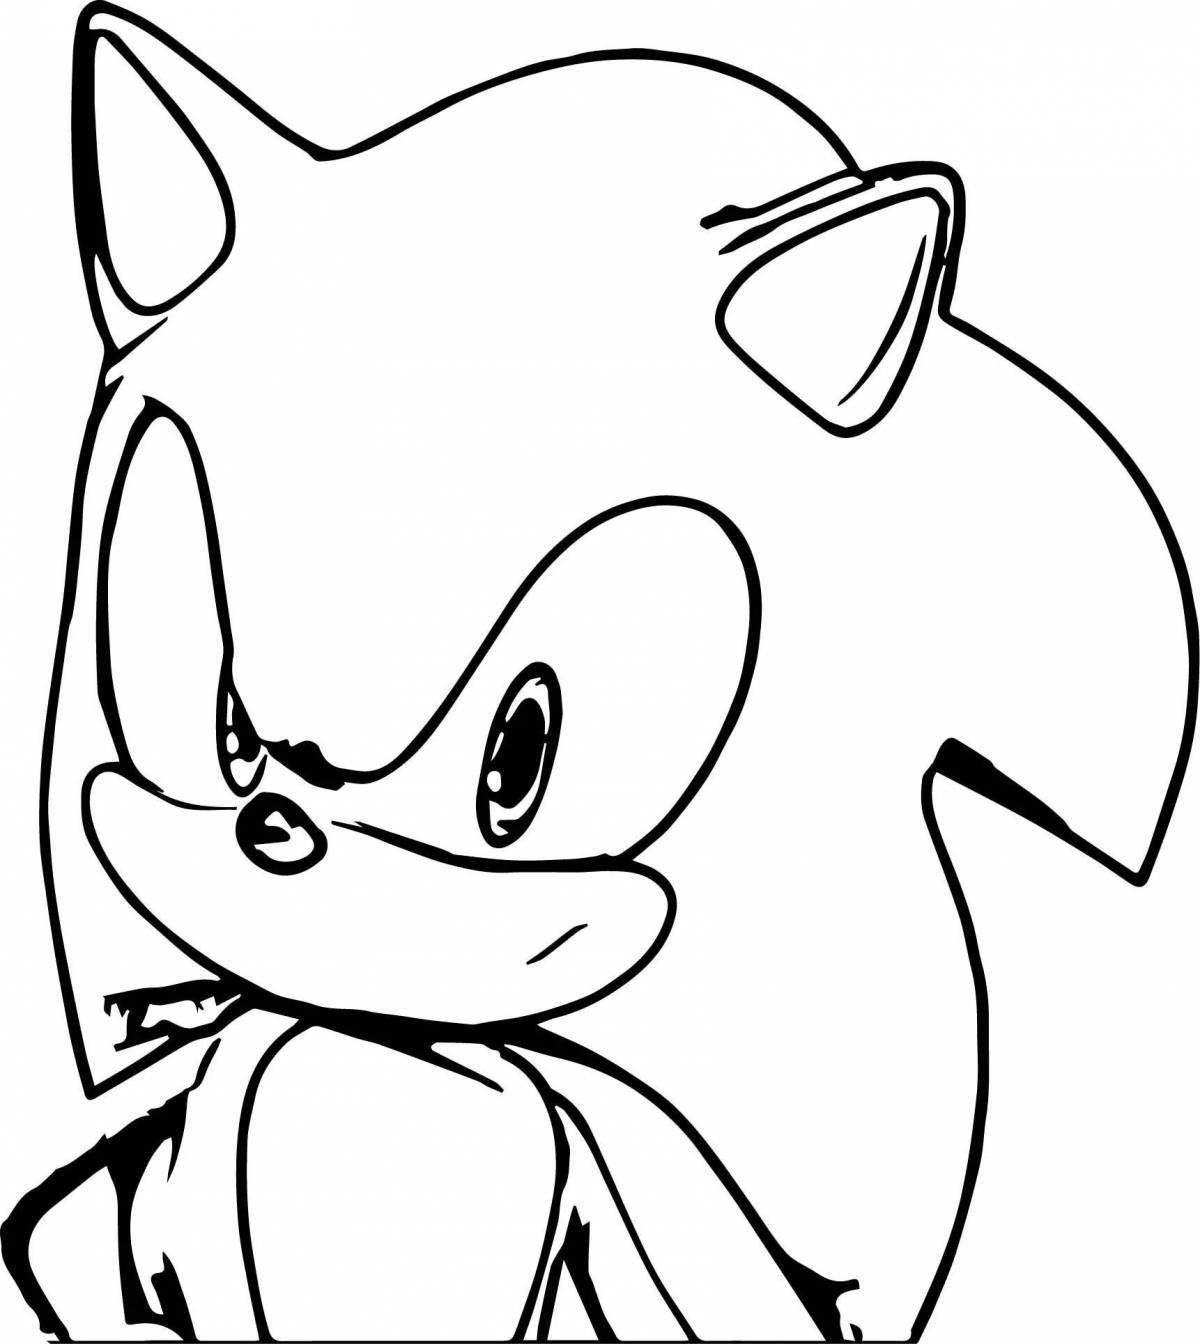 Coloring evil sonic - sinister